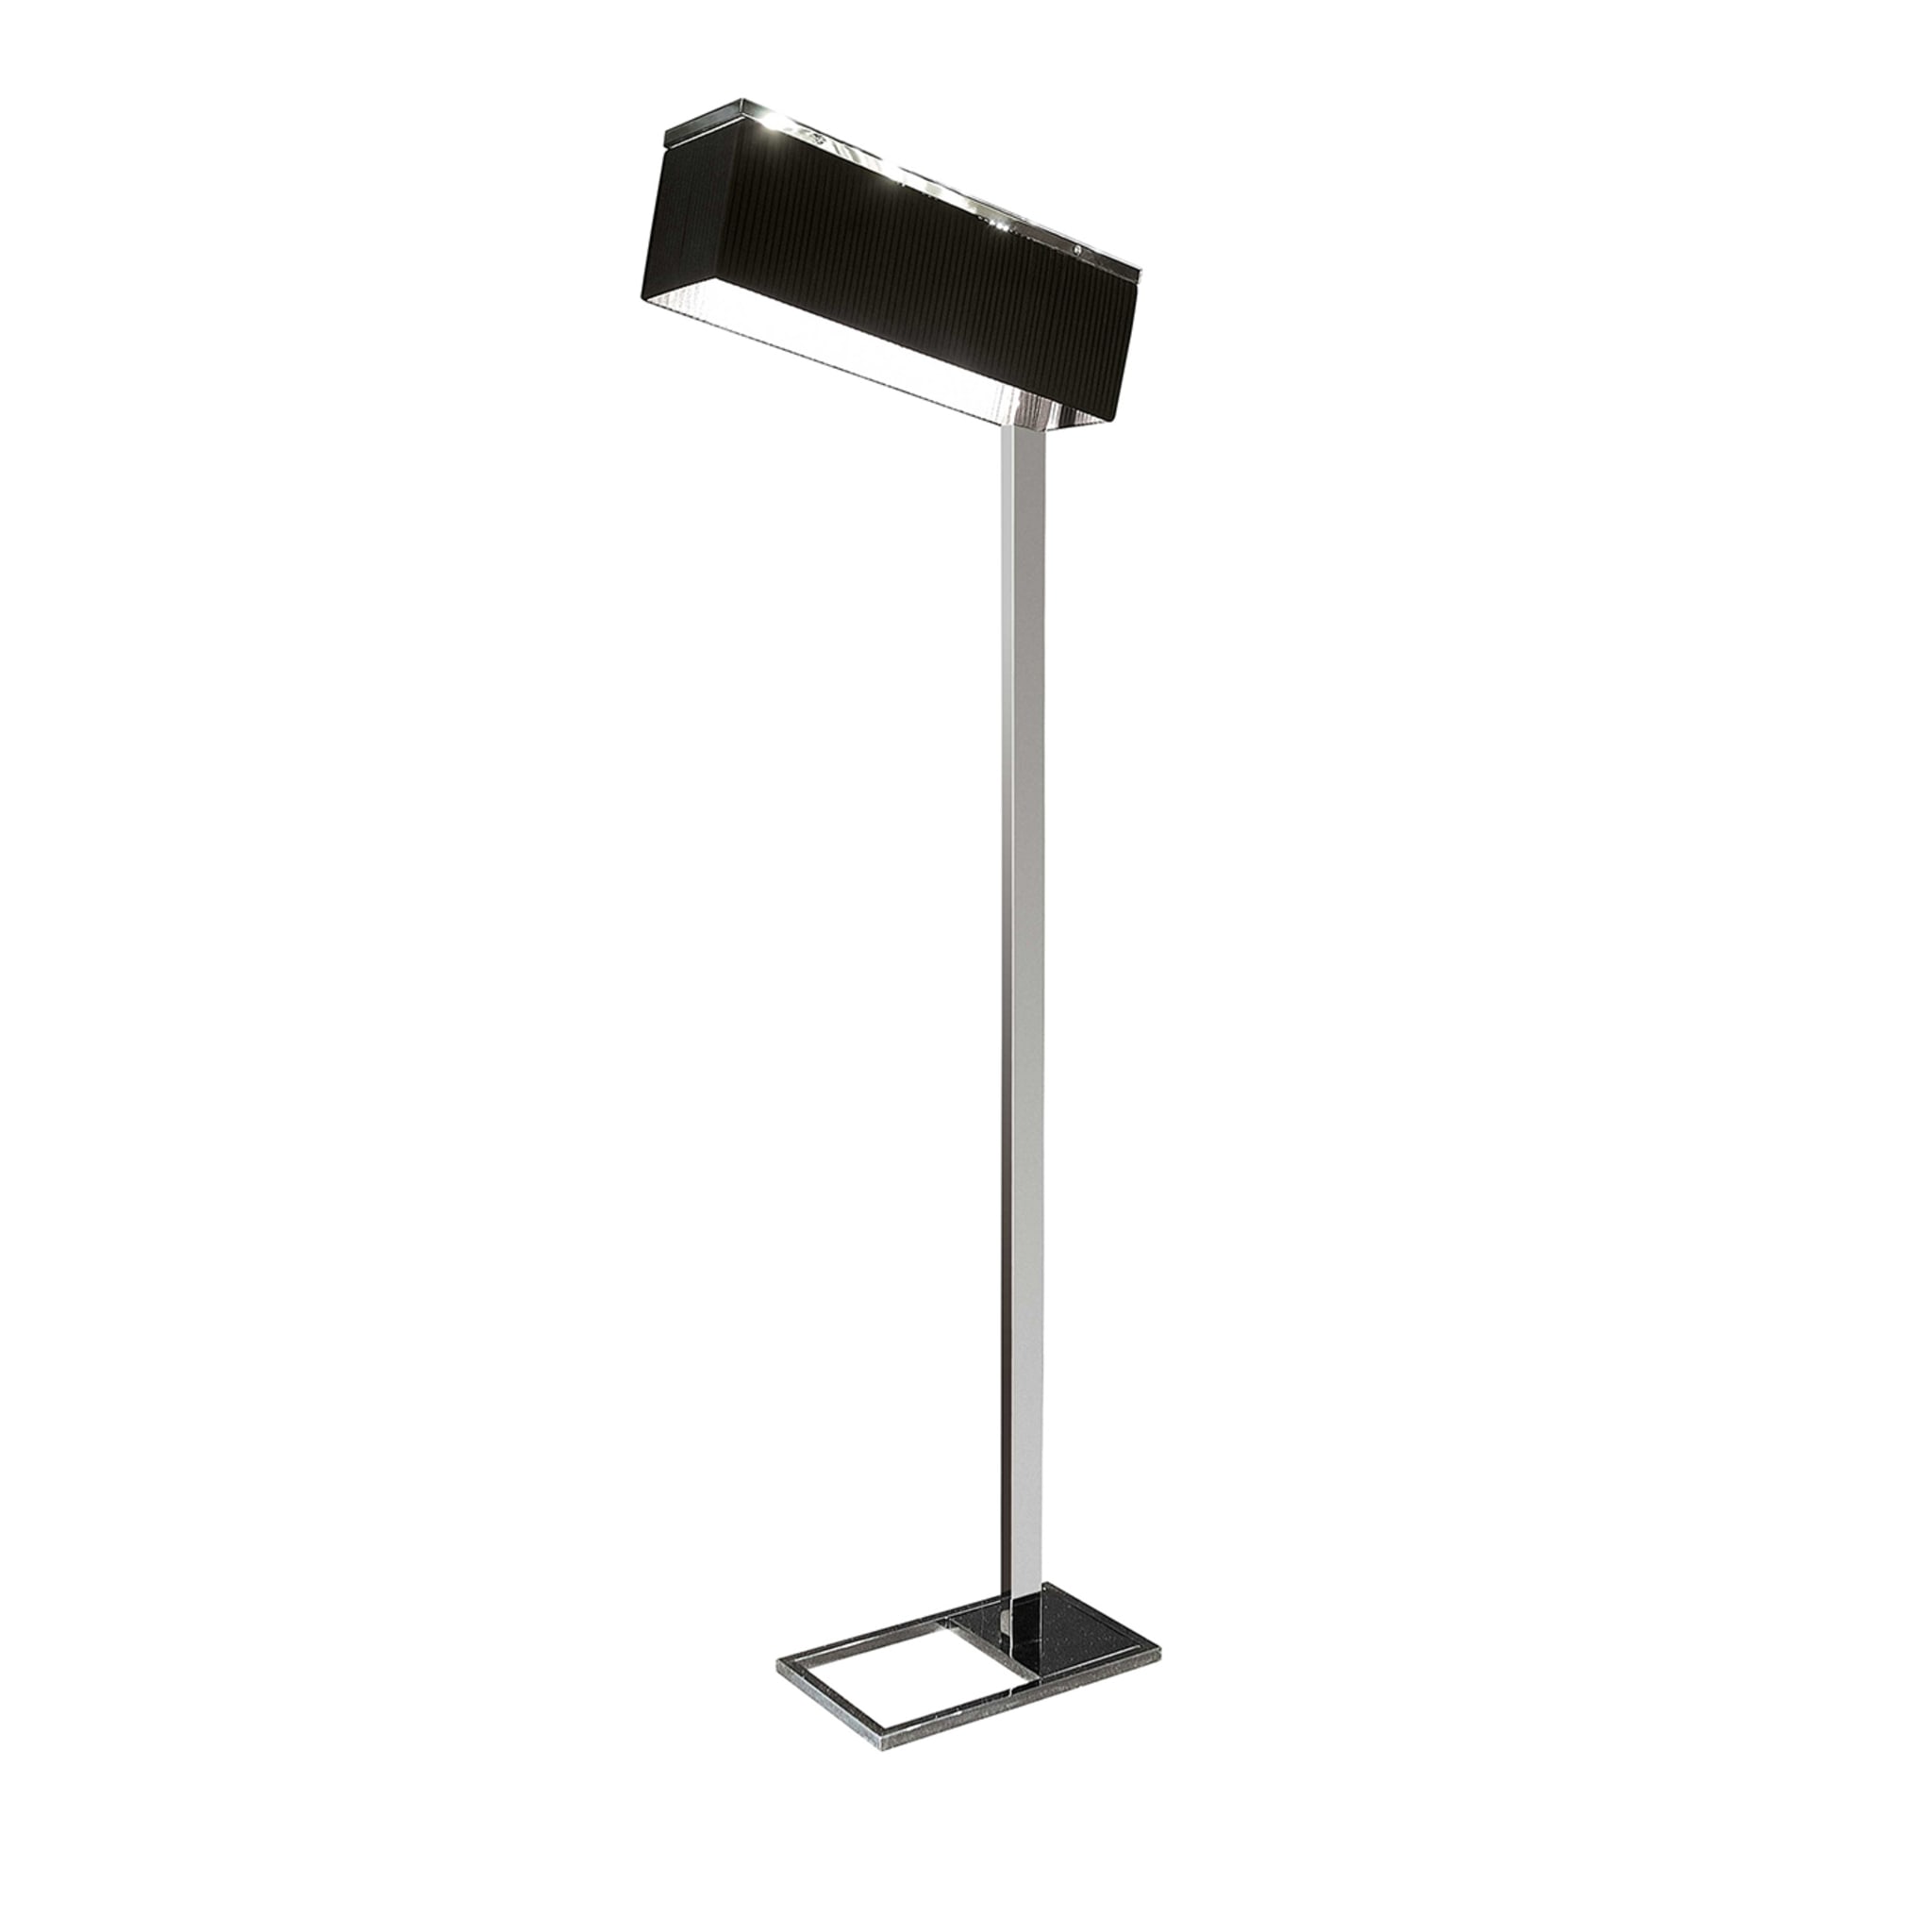 Gimko L Black Floor Lamp by Arch. Luca Sgroi - Main view